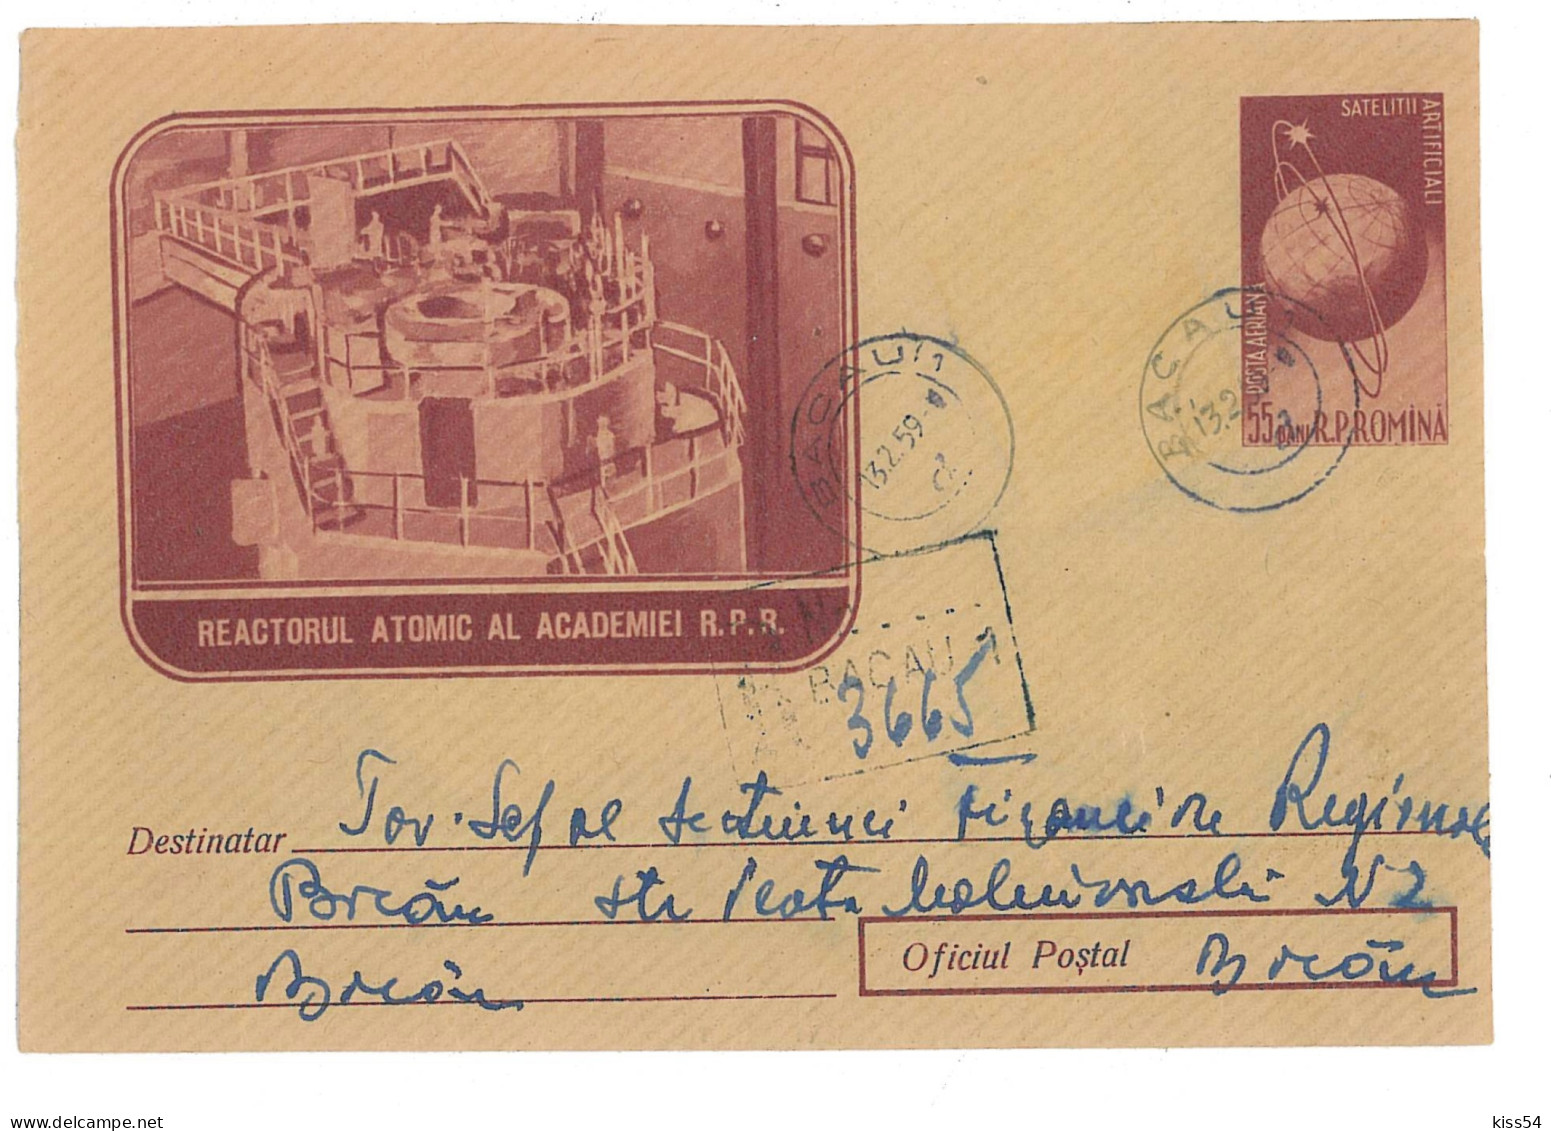 IP 58 A - 0119a-a ENERGY, Atomic Reactor, Romania - REGISTERED Stationery - Used - 1958 - Atomenergie